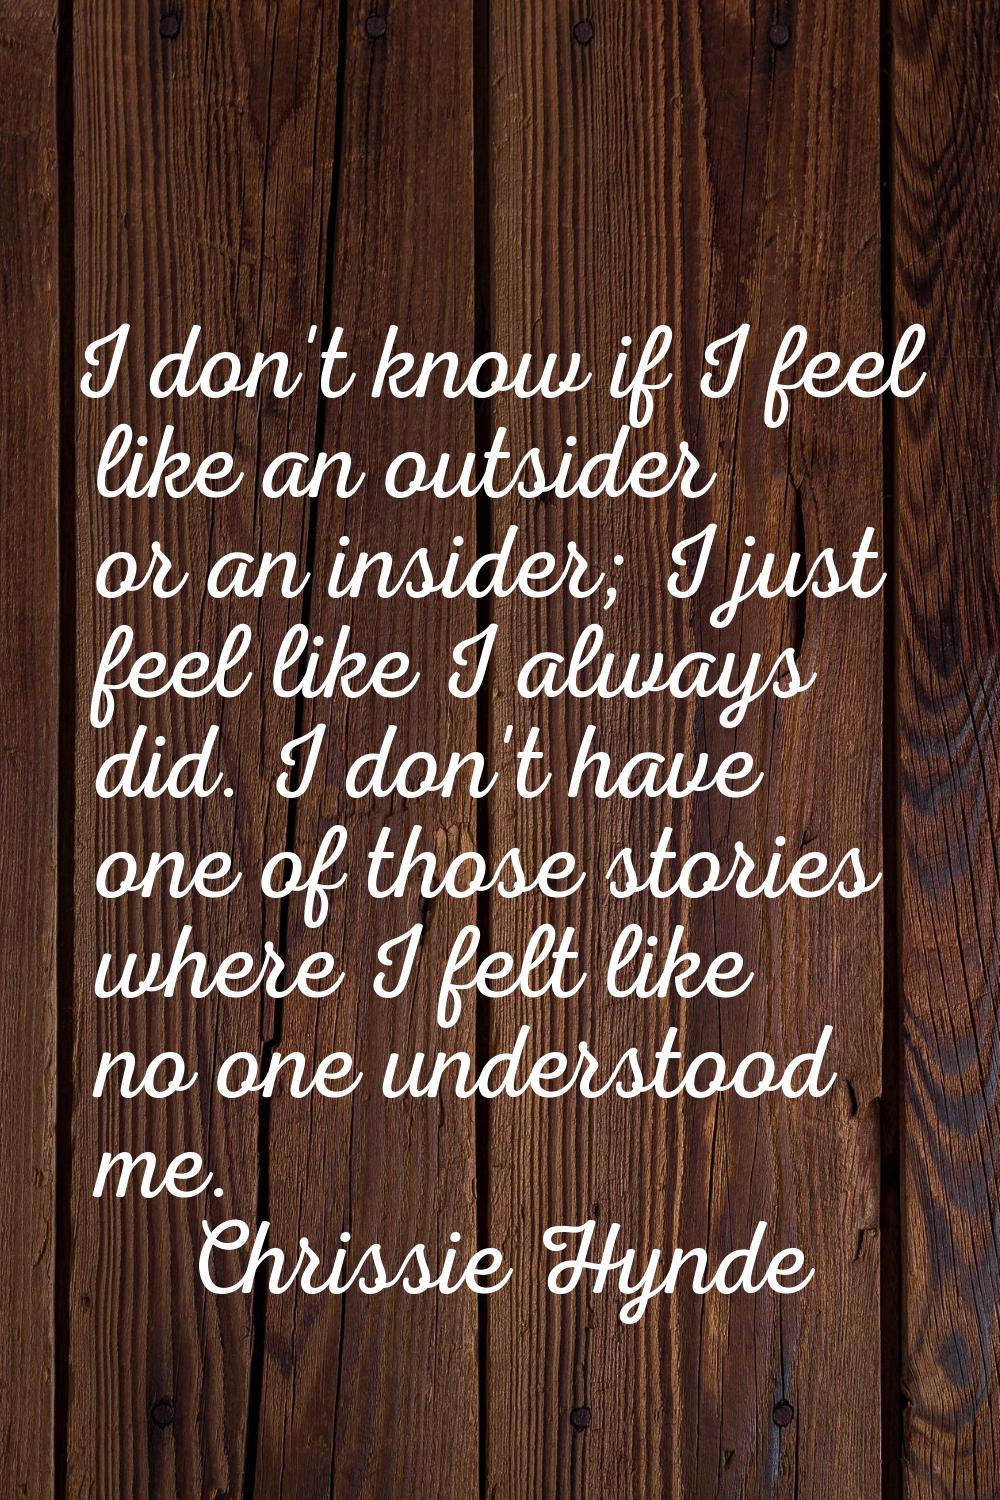 I don't know if I feel like an outsider or an insider; I just feel like I always did. I don't have 